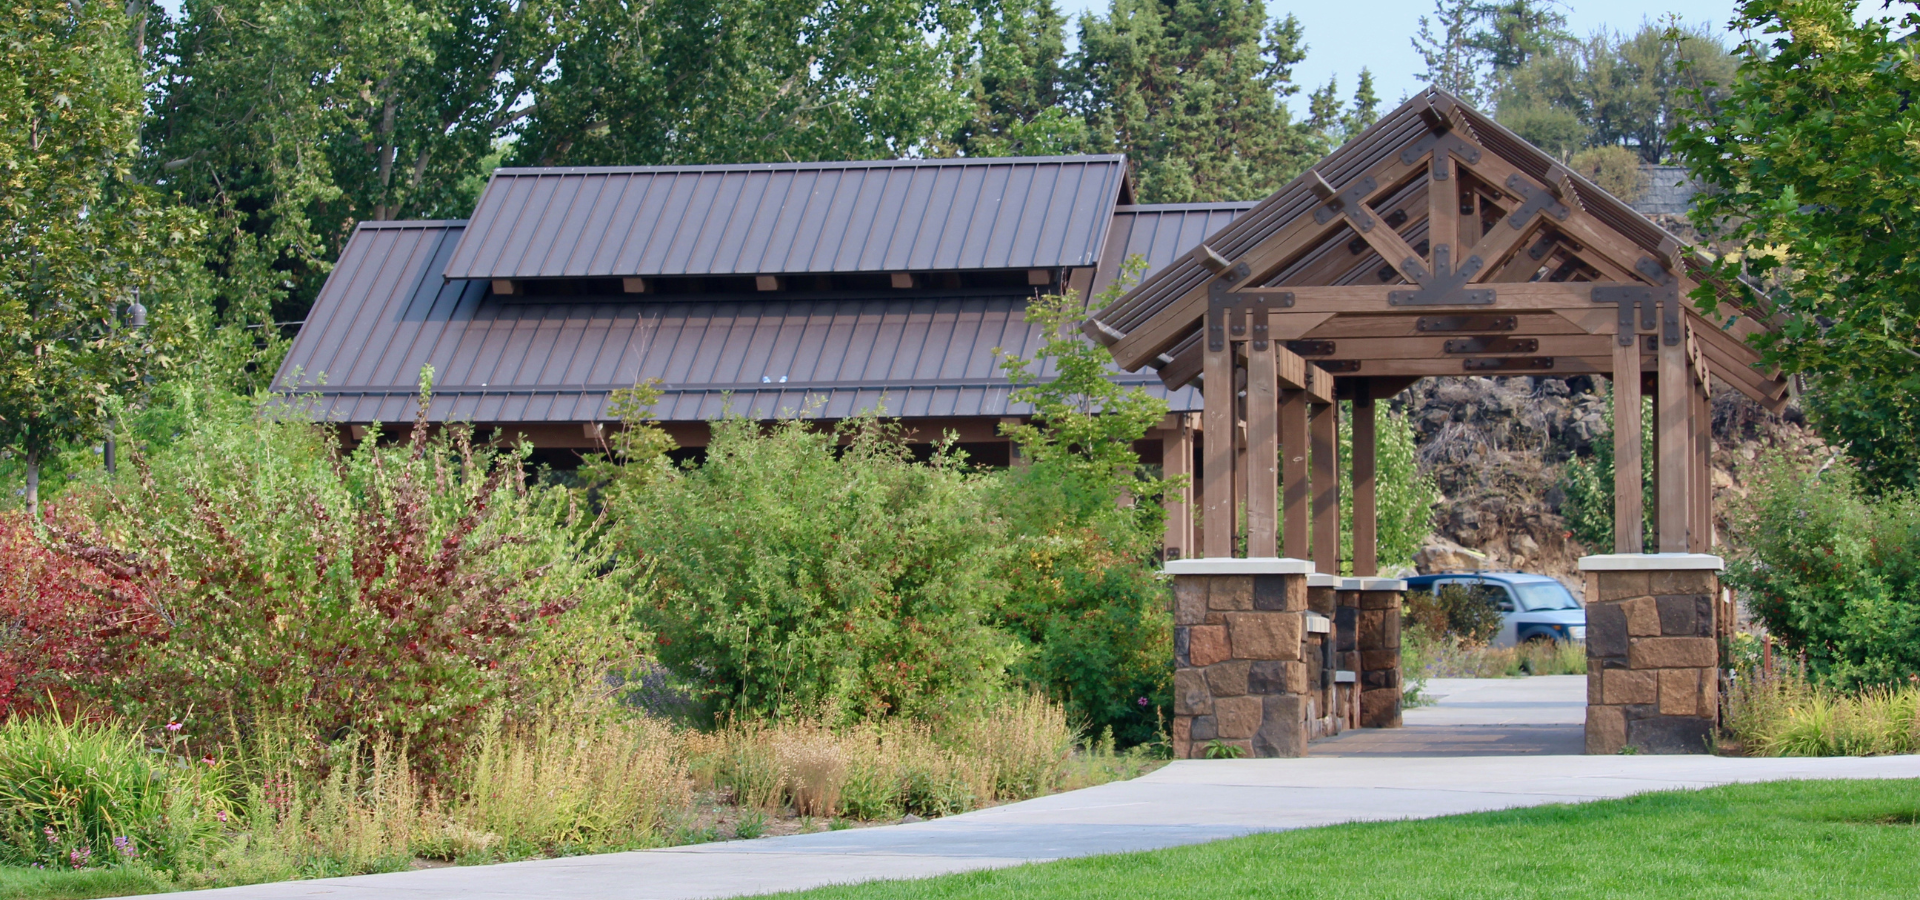 paved walkway leads into a small picnic shelter at Miller's Landing park with larger shelter in abckground